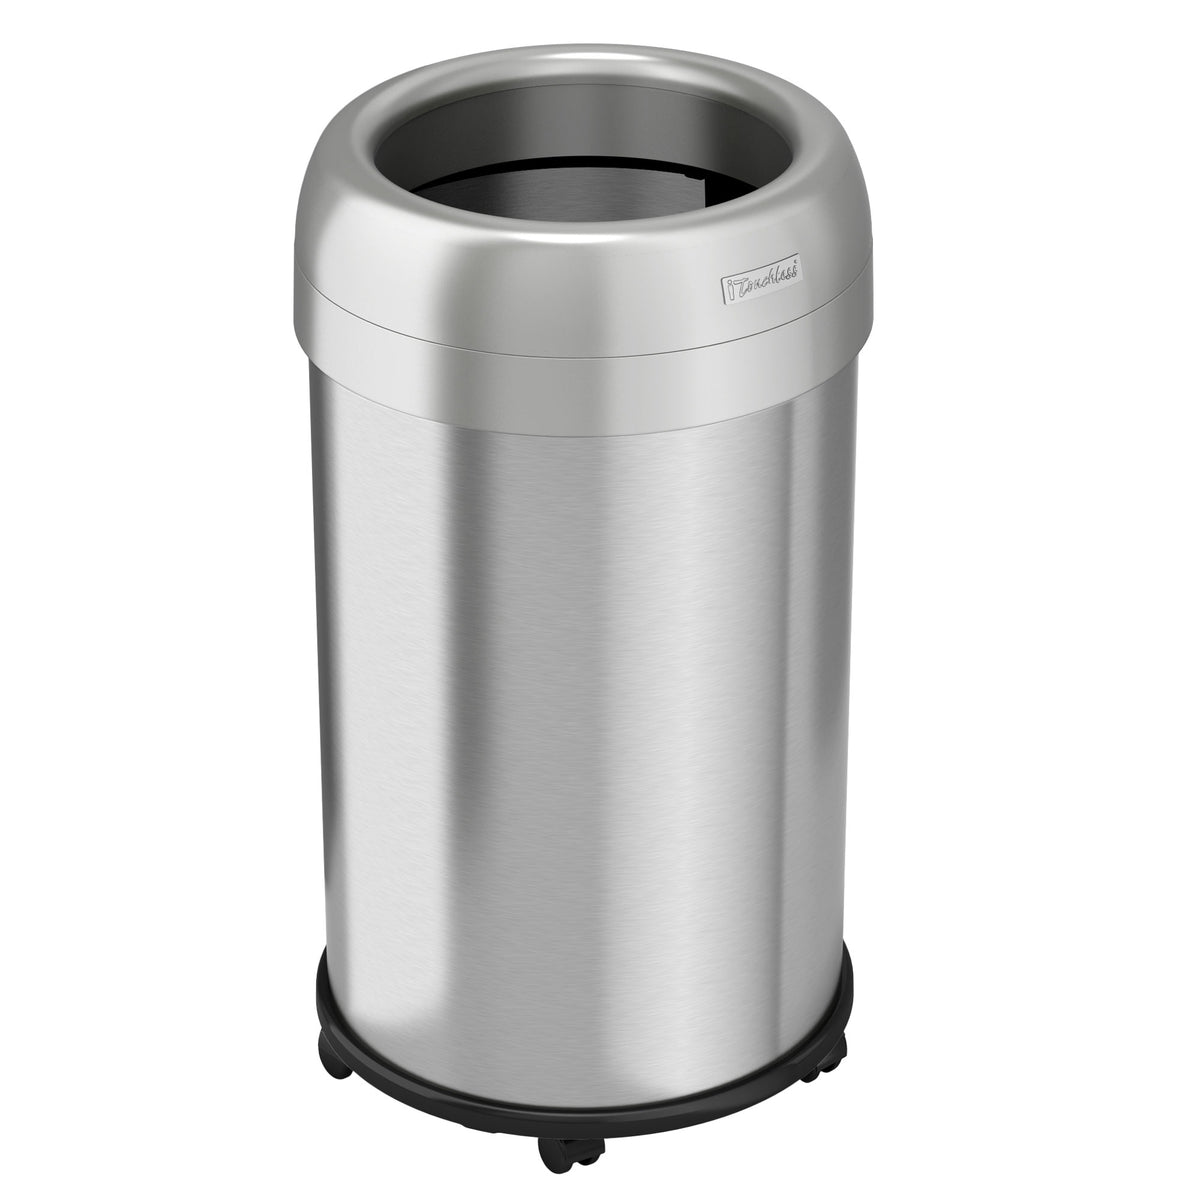 13 Gallon Round Open Top Trash Can with Wheels